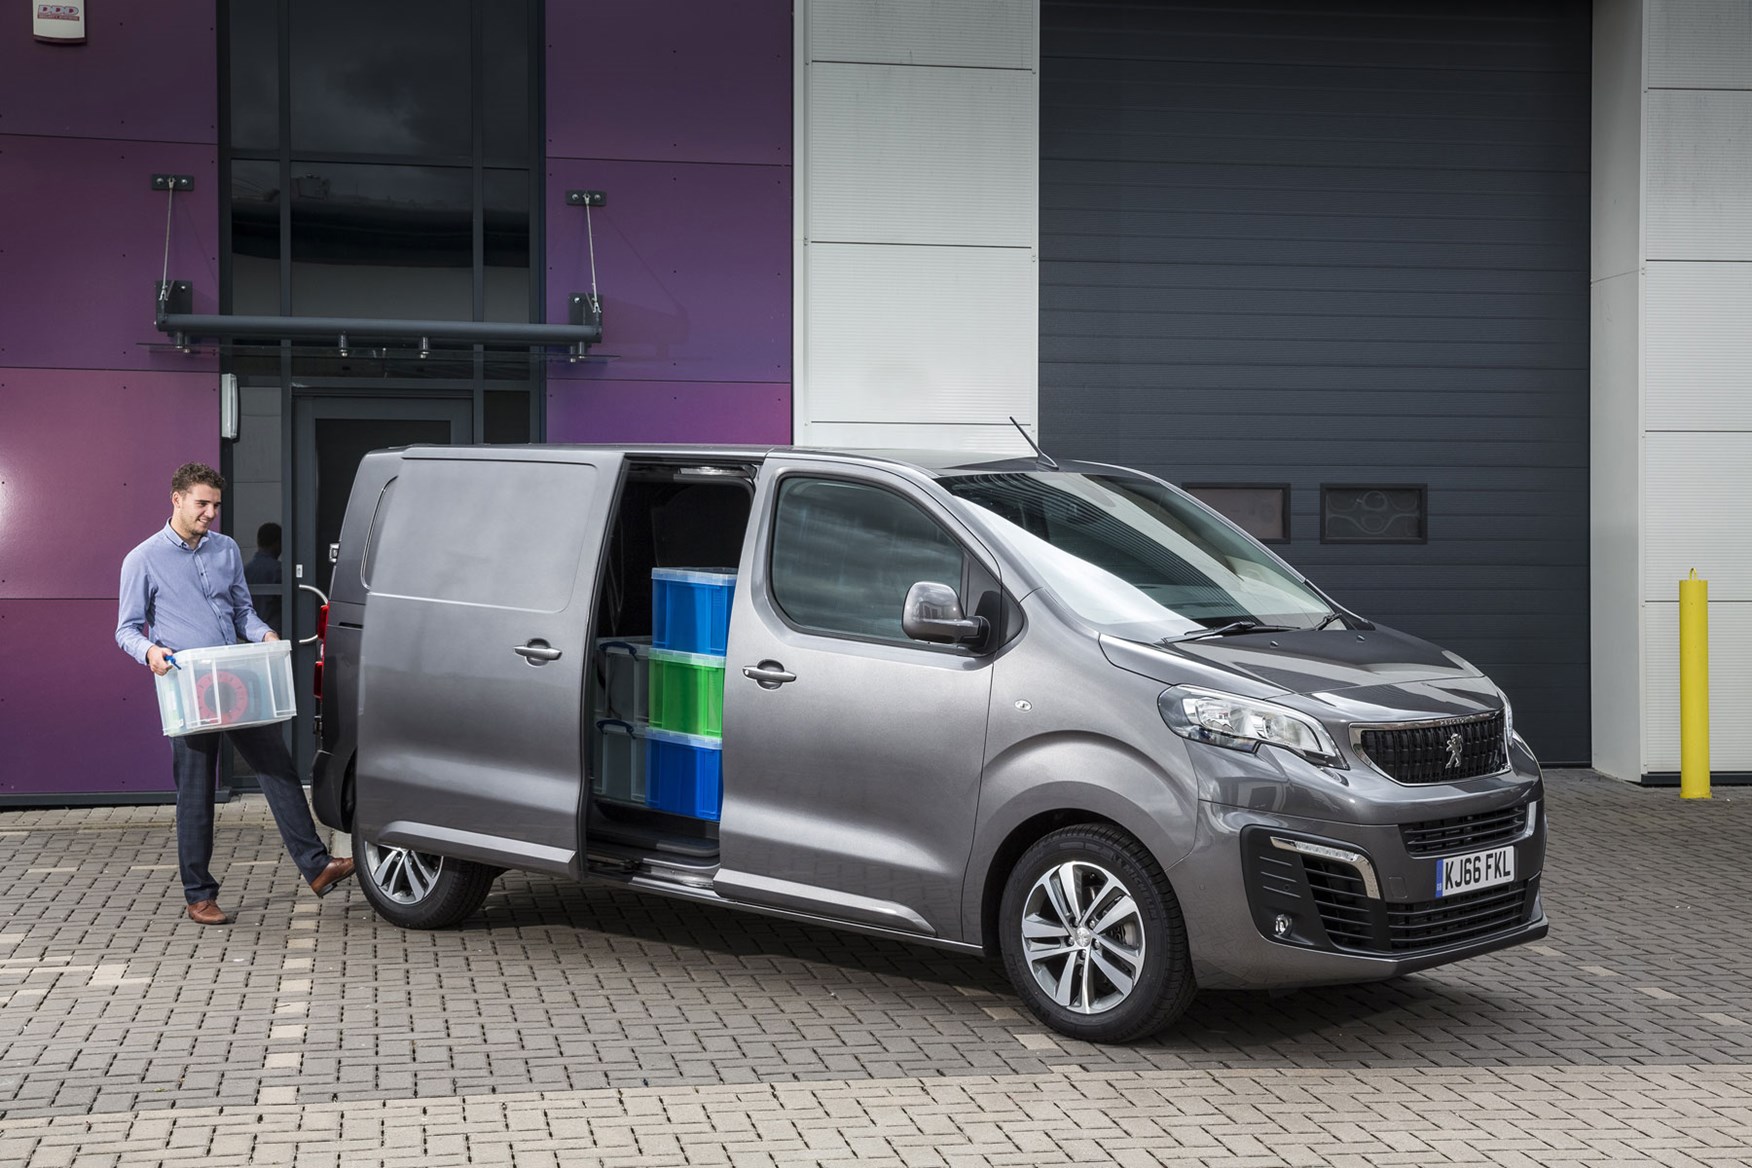 Peugeot Expert - 2016 model, front view, loaded van with man activating electric side doors with foot